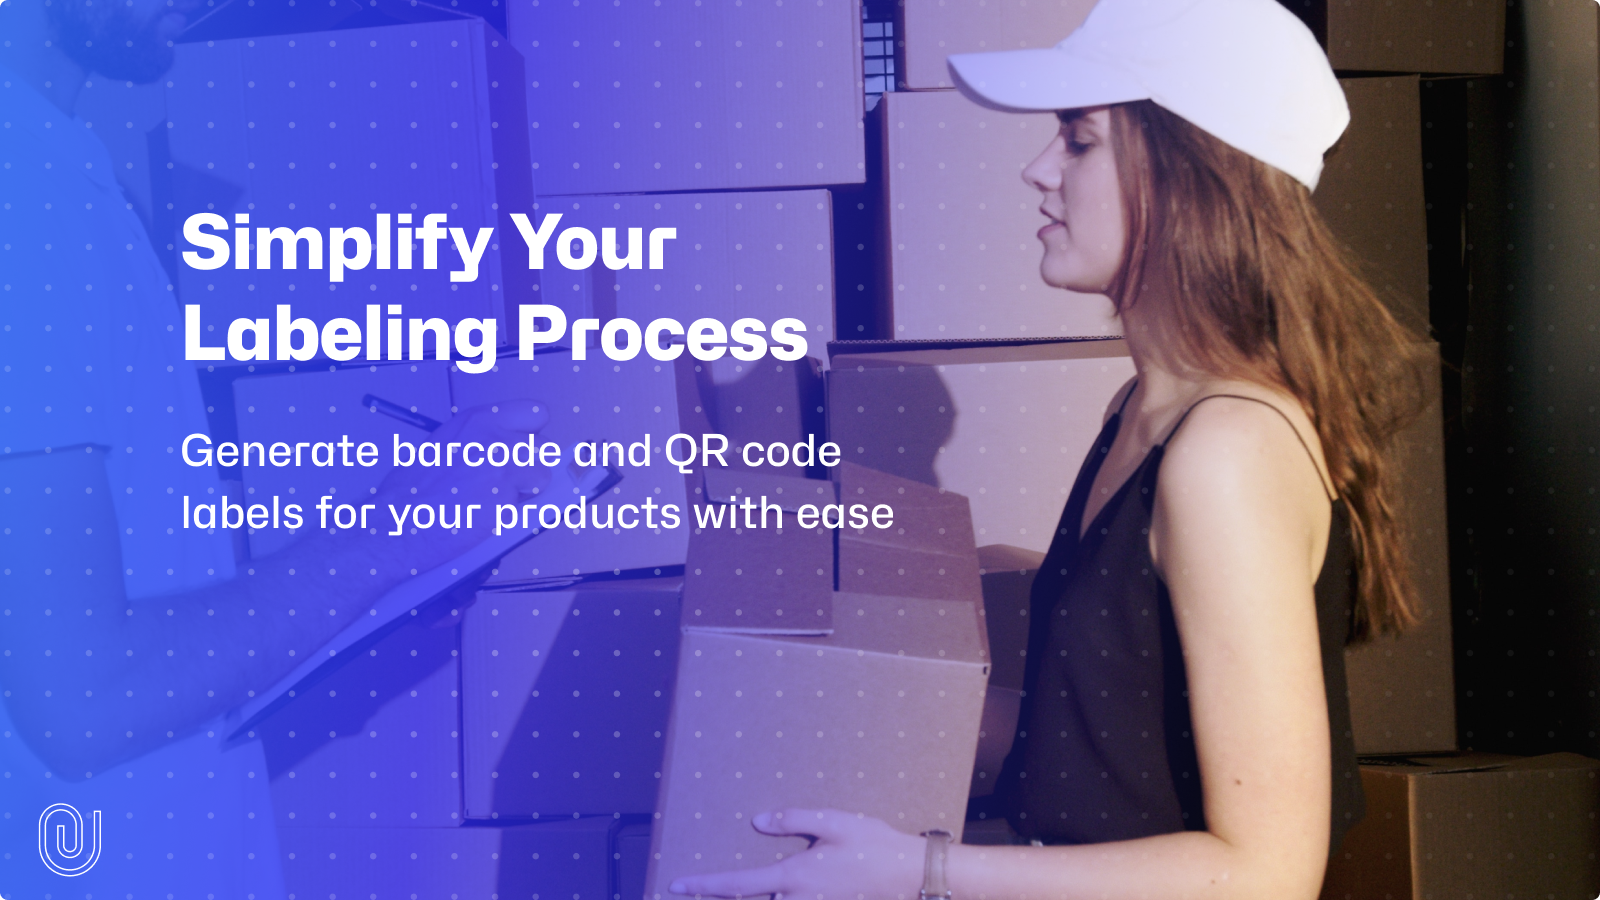 Manage Retails Barcode campaigns at single place